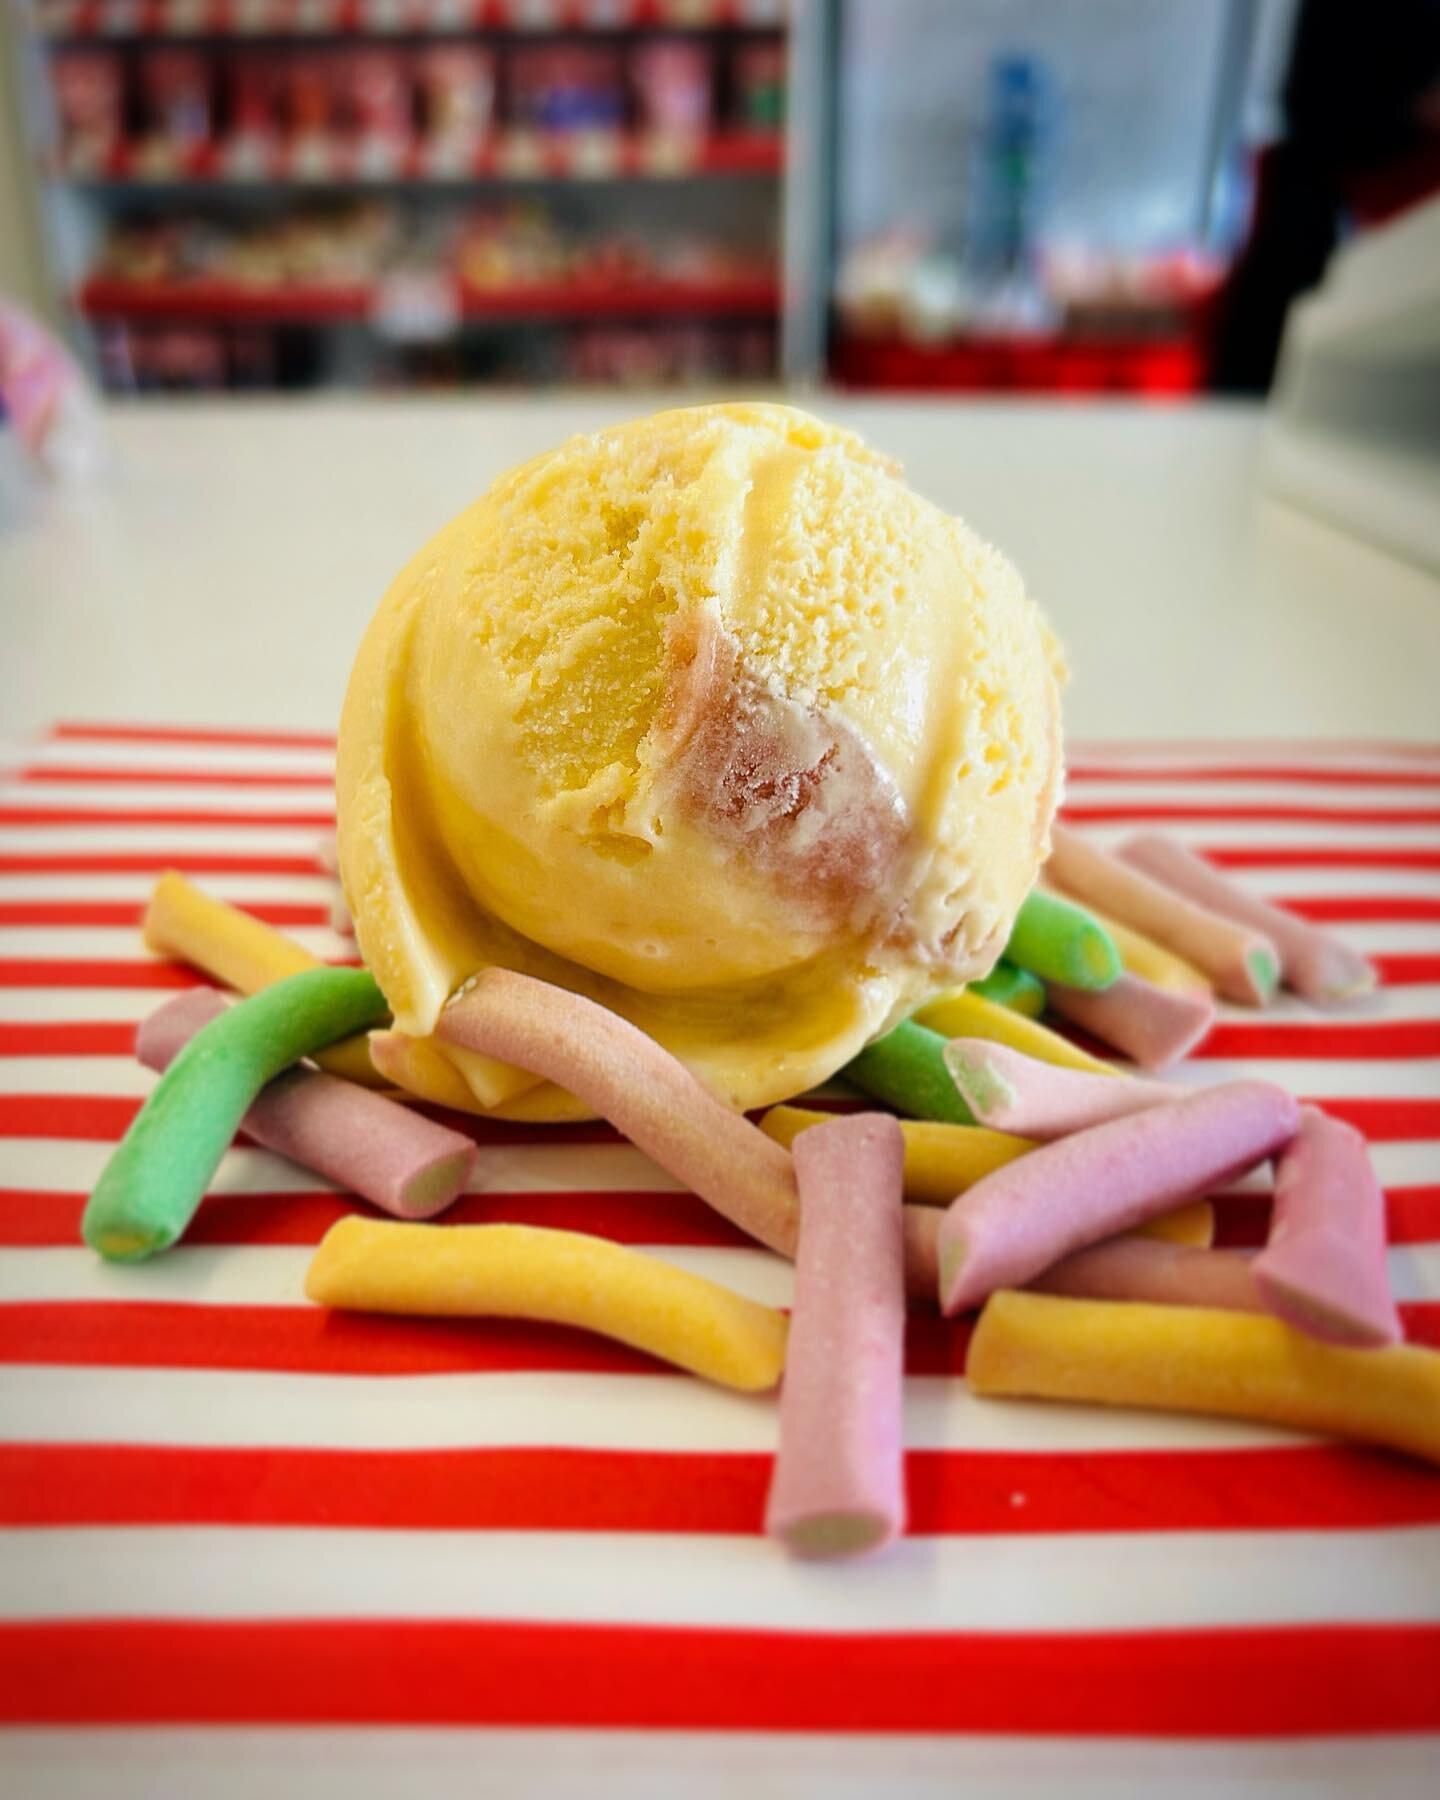 For the month of May we decided to bring back a cult classic which we first batched up back in 2018 - Rhubarb &amp; Custard 🍦

Just for clarity we don&rsquo;t actually use Rhubarb &amp; Custard tubes to flavour our ice-cream 😅, in fact we use Rhuba